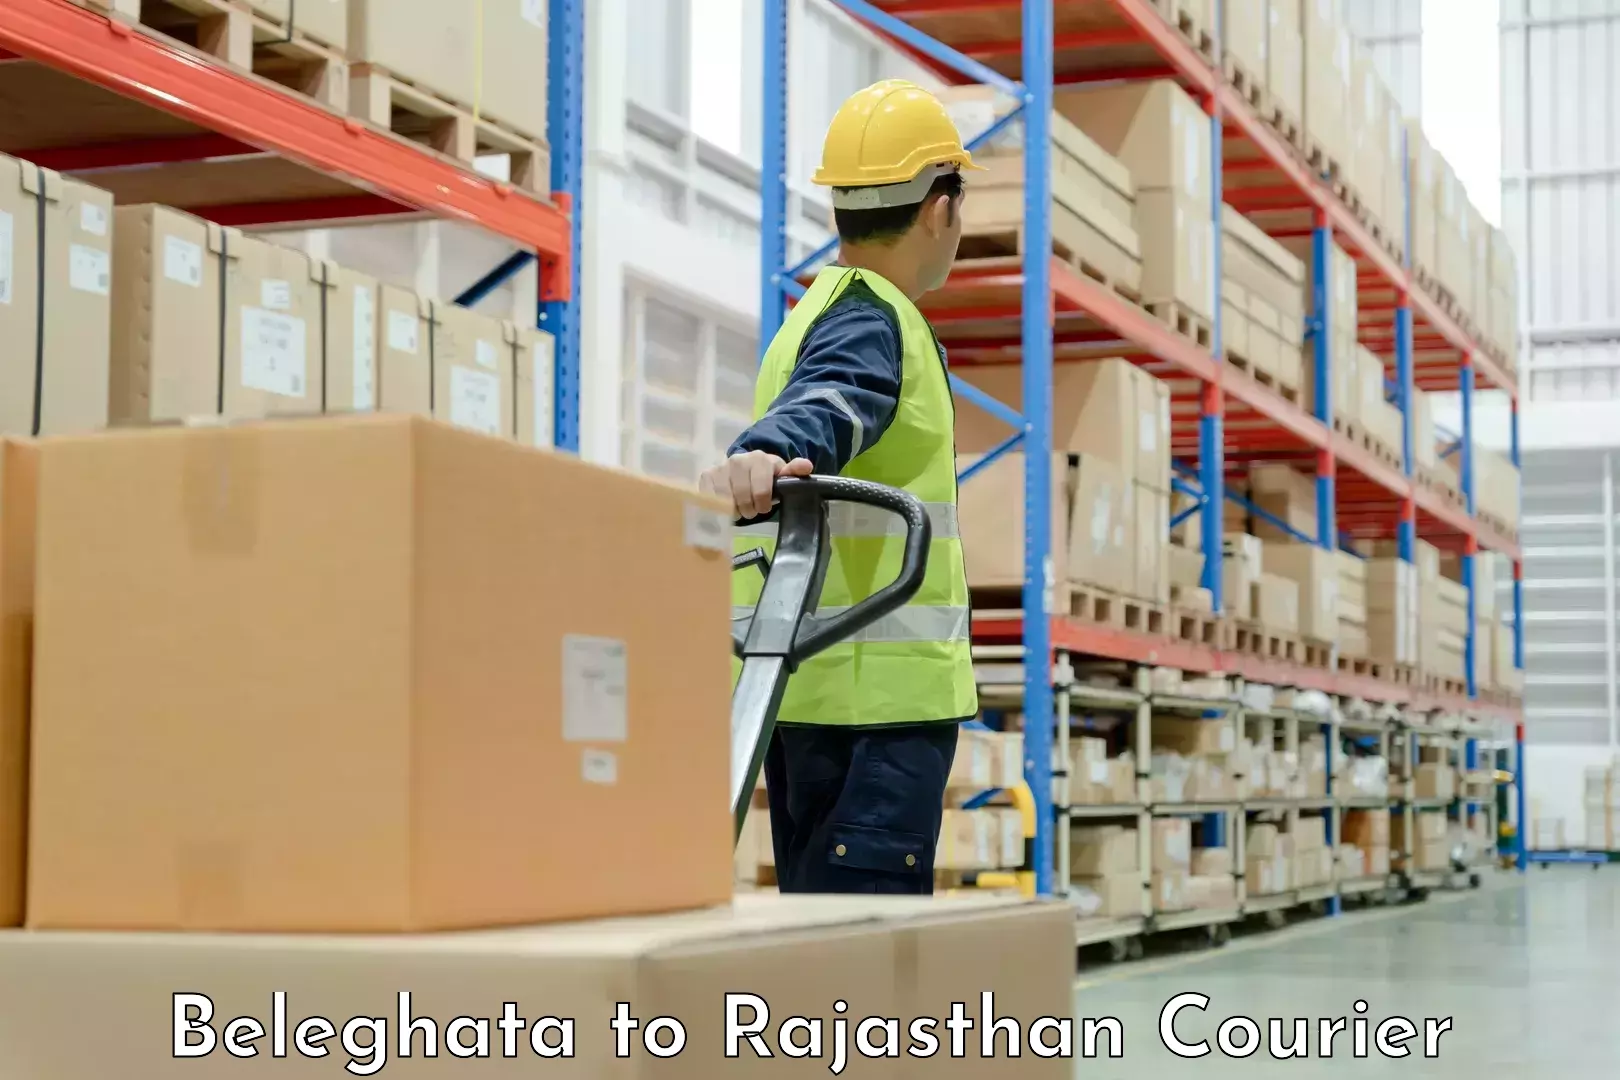 Furniture delivery service Beleghata to Rajasthan